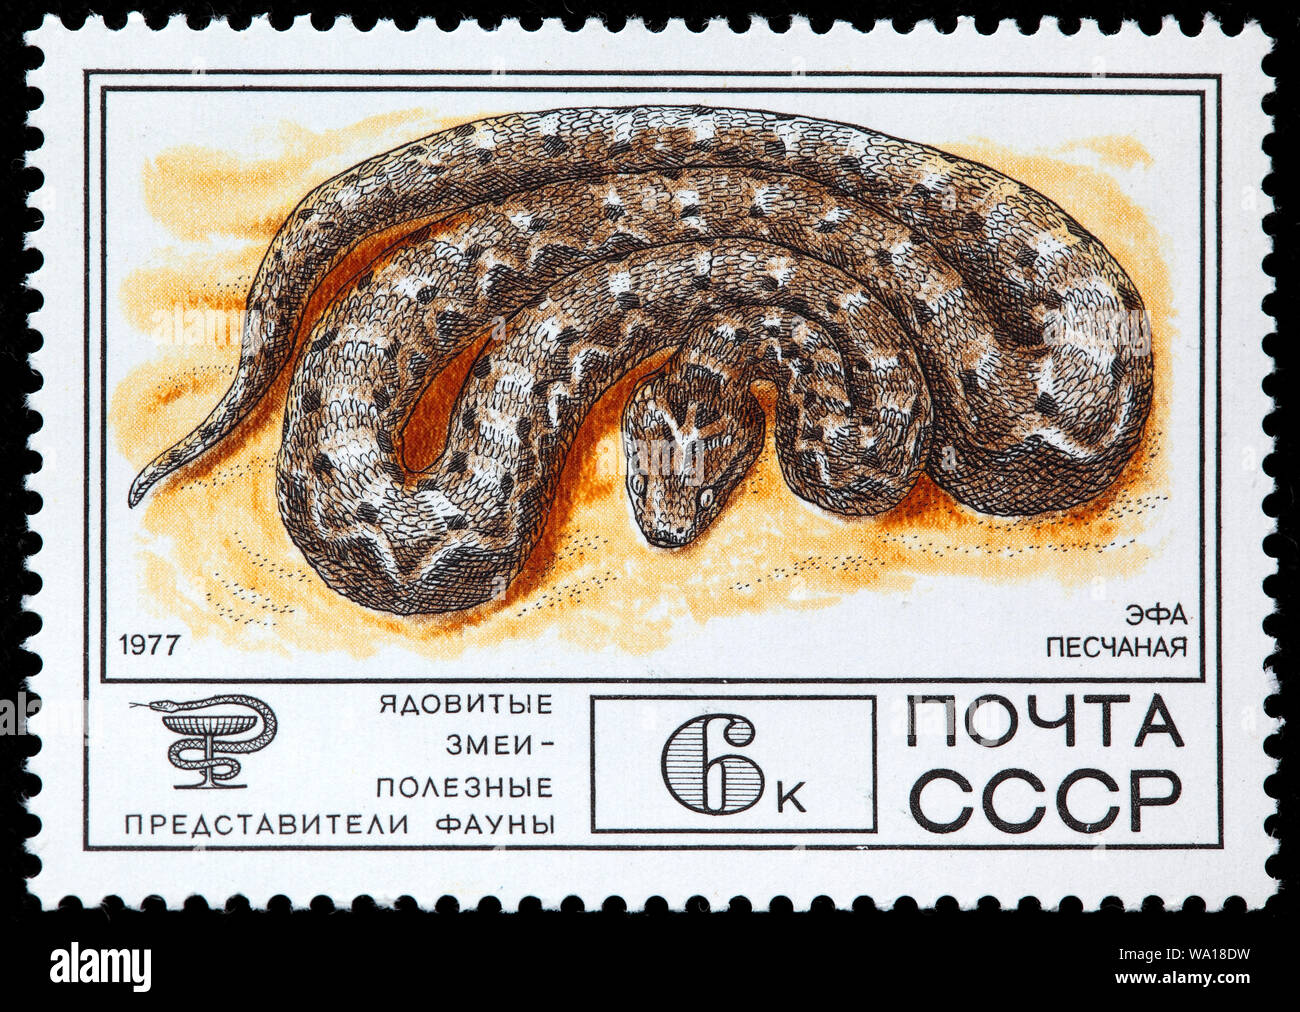 Saw-scaled viper, Echis carinatus, venomous snake, postage stamp, Russia, USSR, 1977 Stock Photo